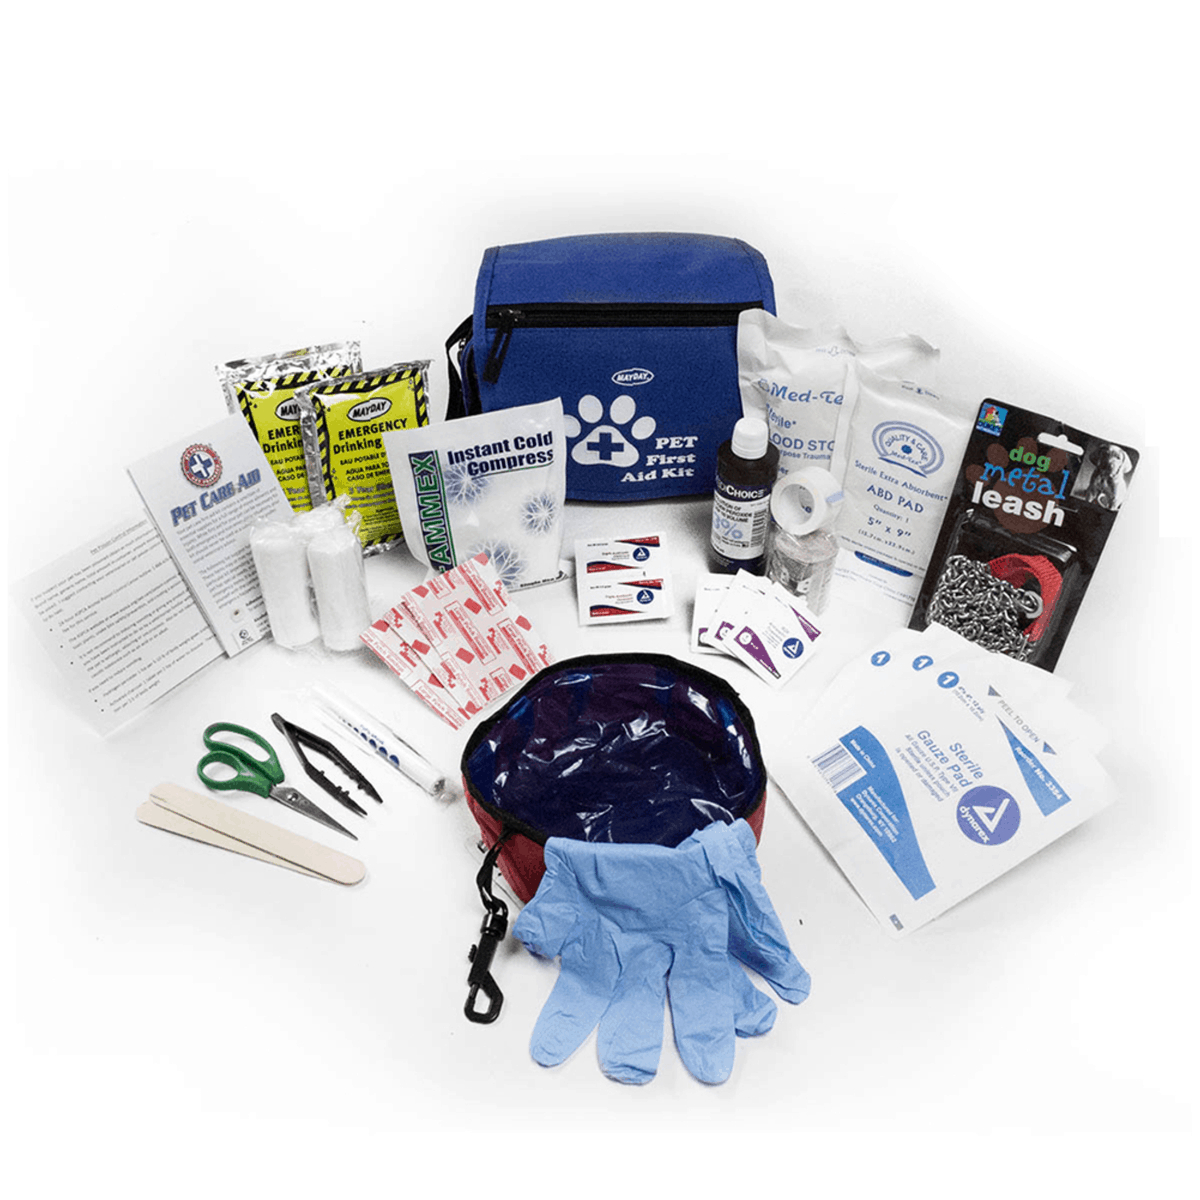 Pet First Aid Kit Deluxe (Veterinarian Approved)